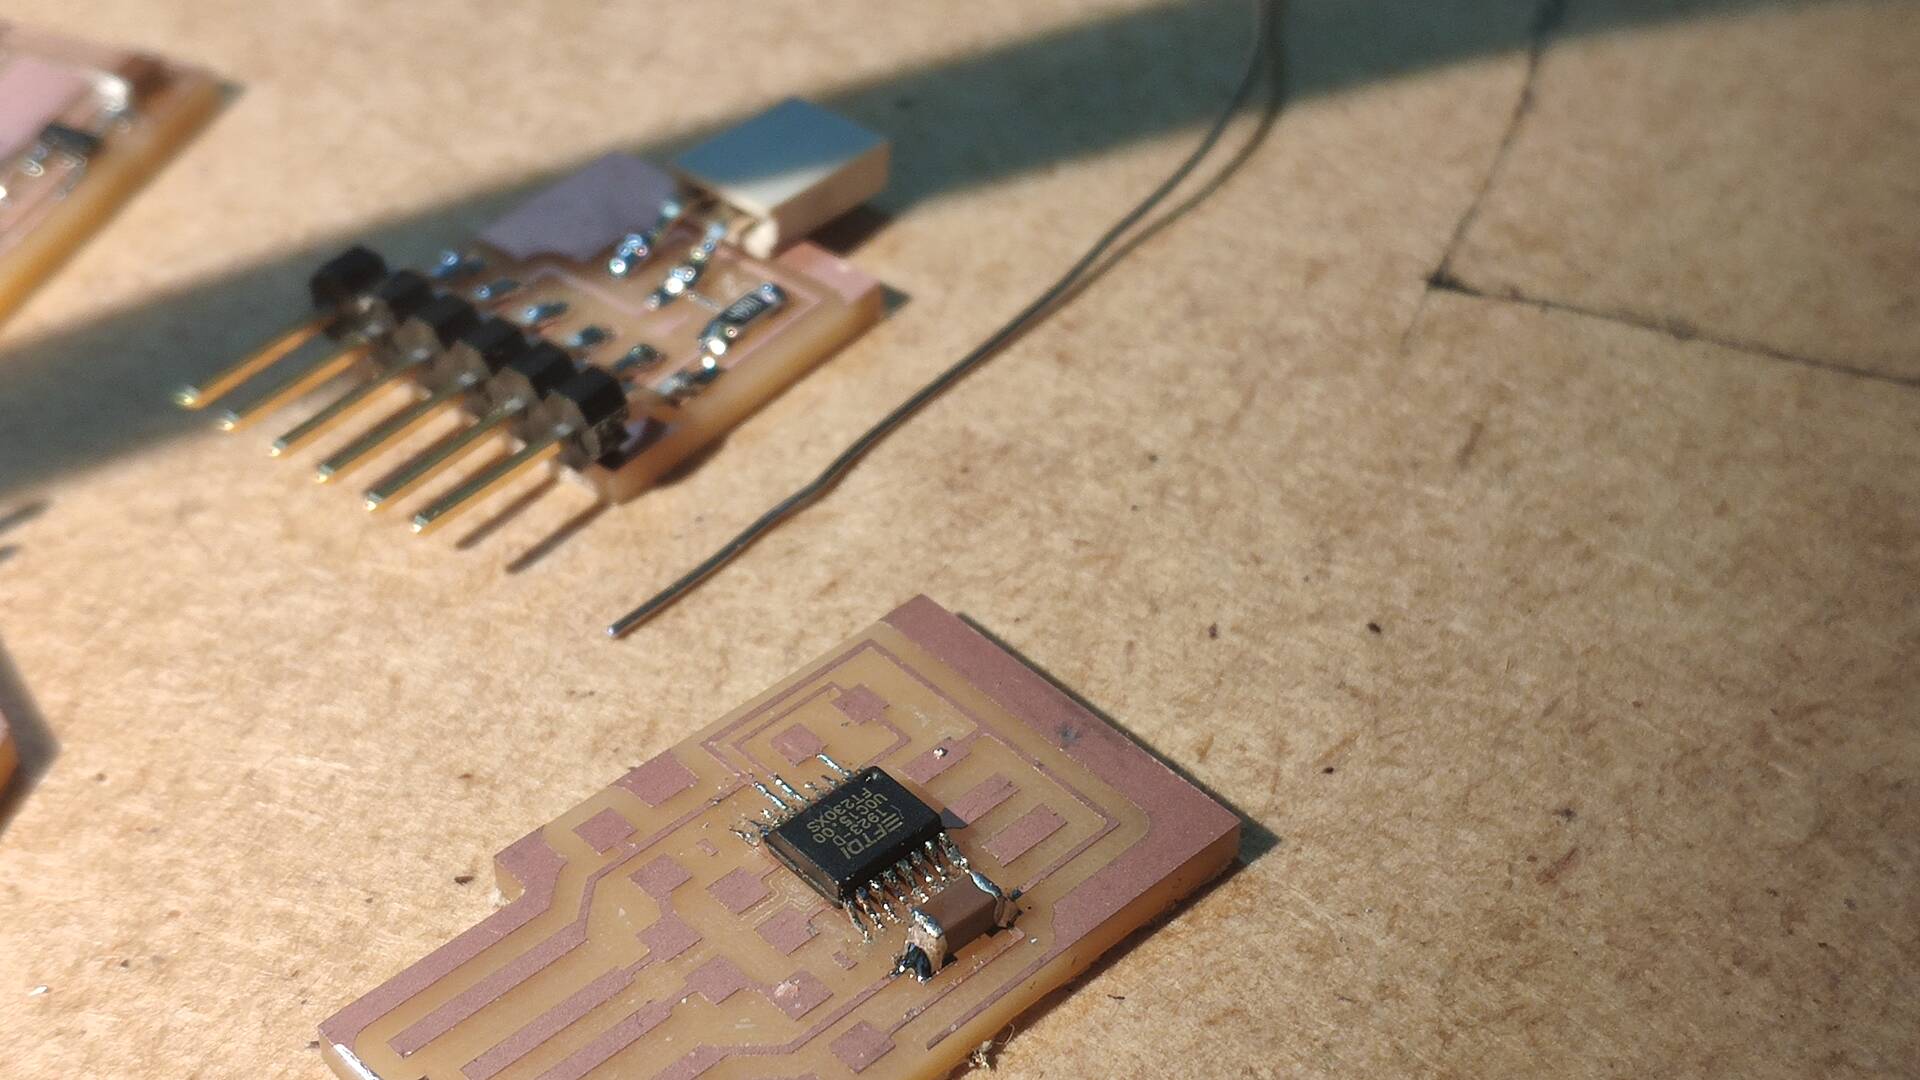 Soldering Other Boards